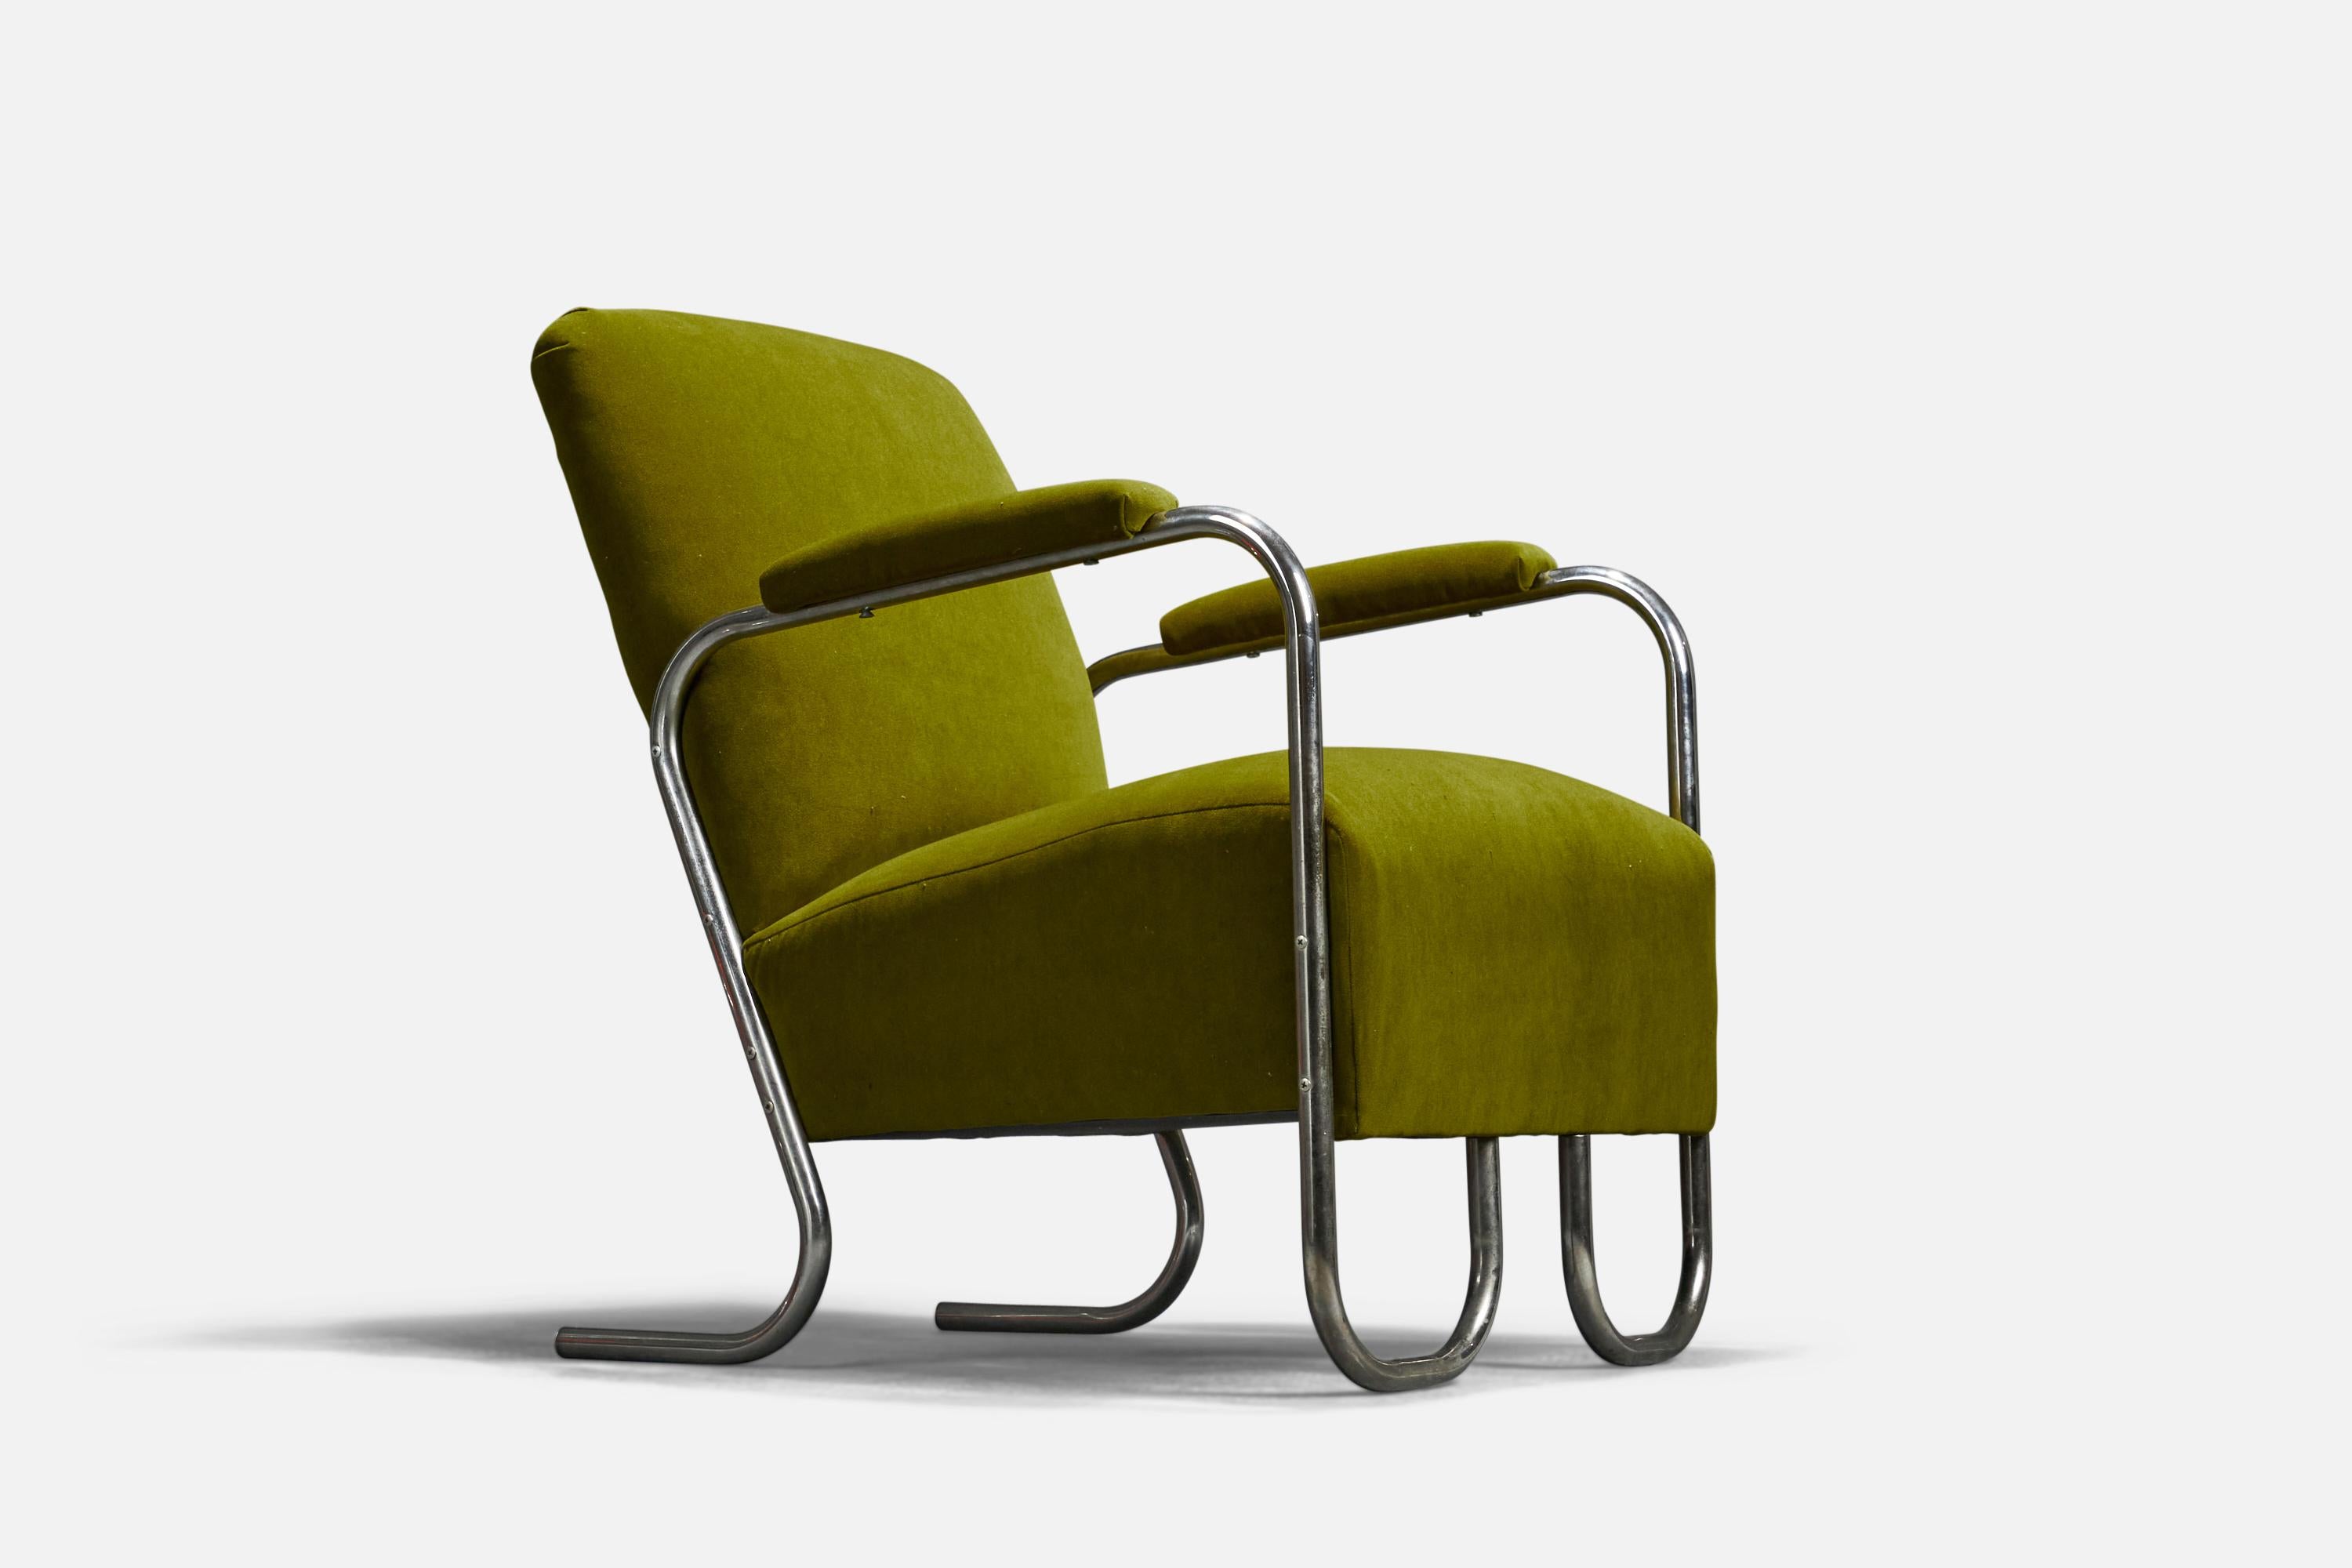 A pair of tubular steel and green velvet lounge chairs designed and produced in the United States, 1930s.